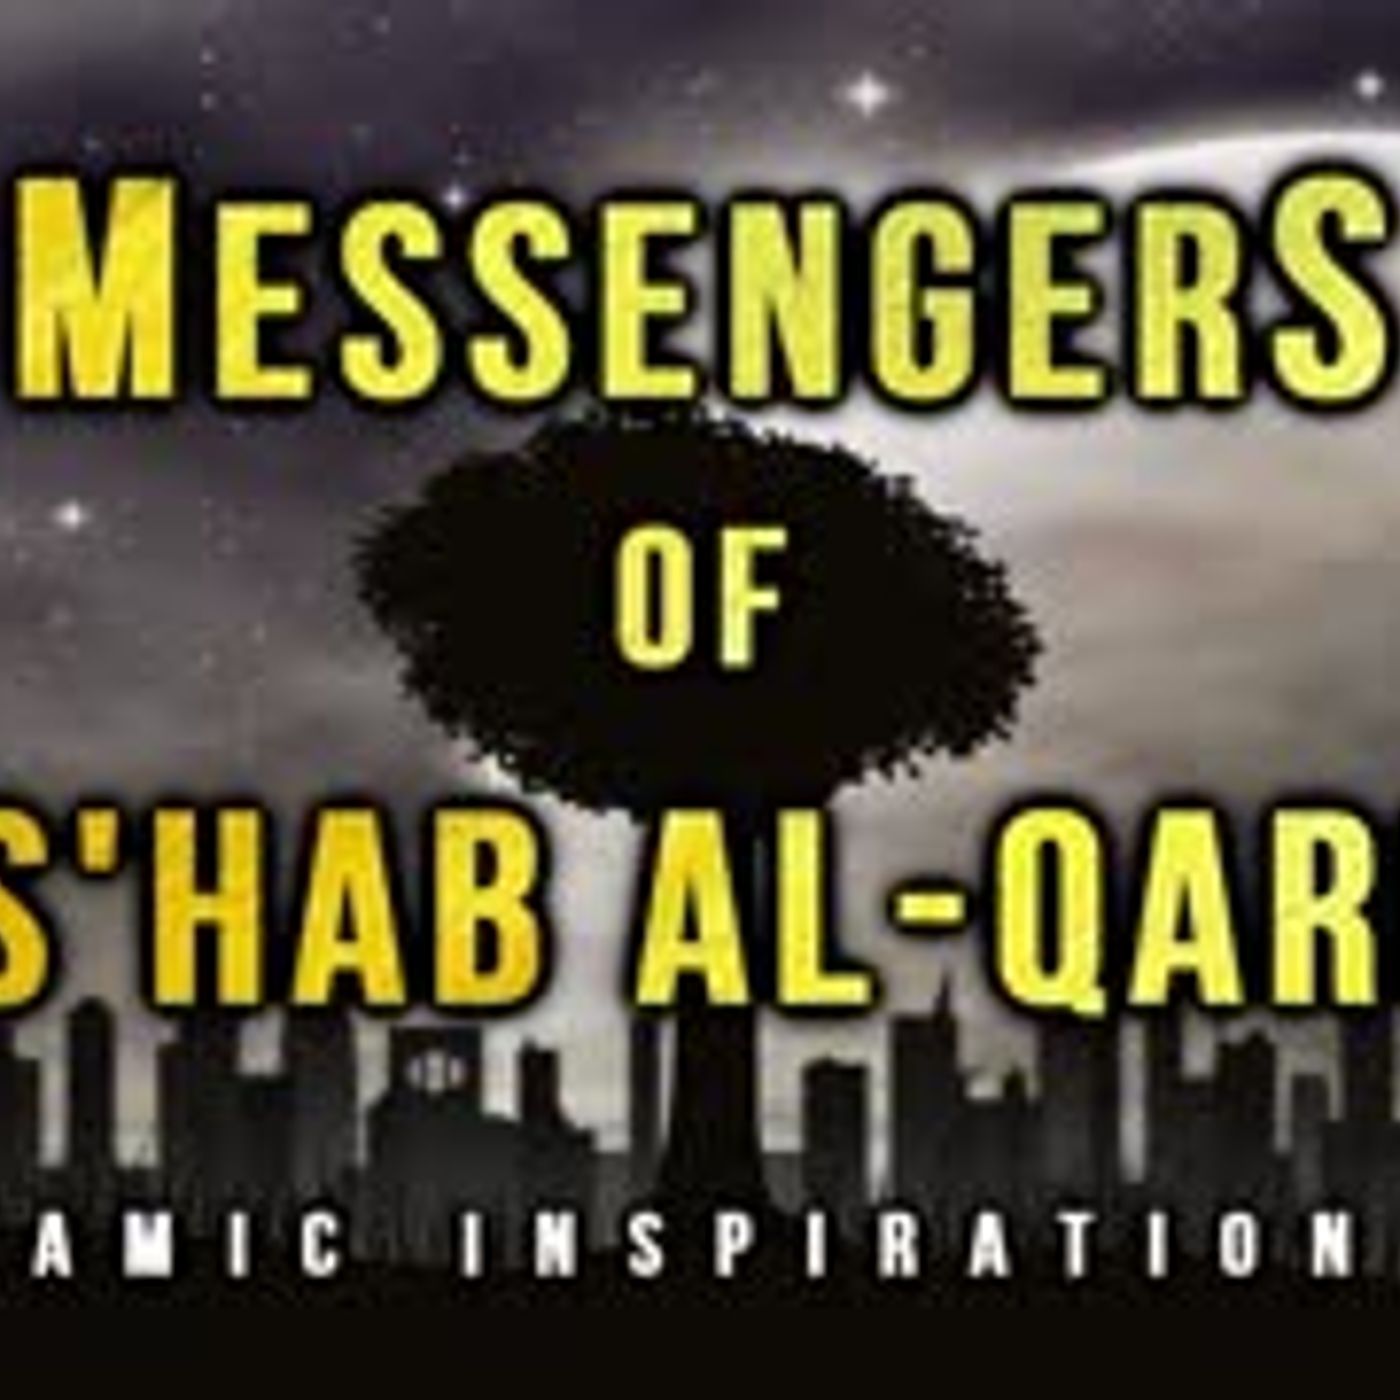 [BE025] The Story Of Surah Yaseen [Dwellers Of The Town] - Messengers Of As'hab Al Qaria